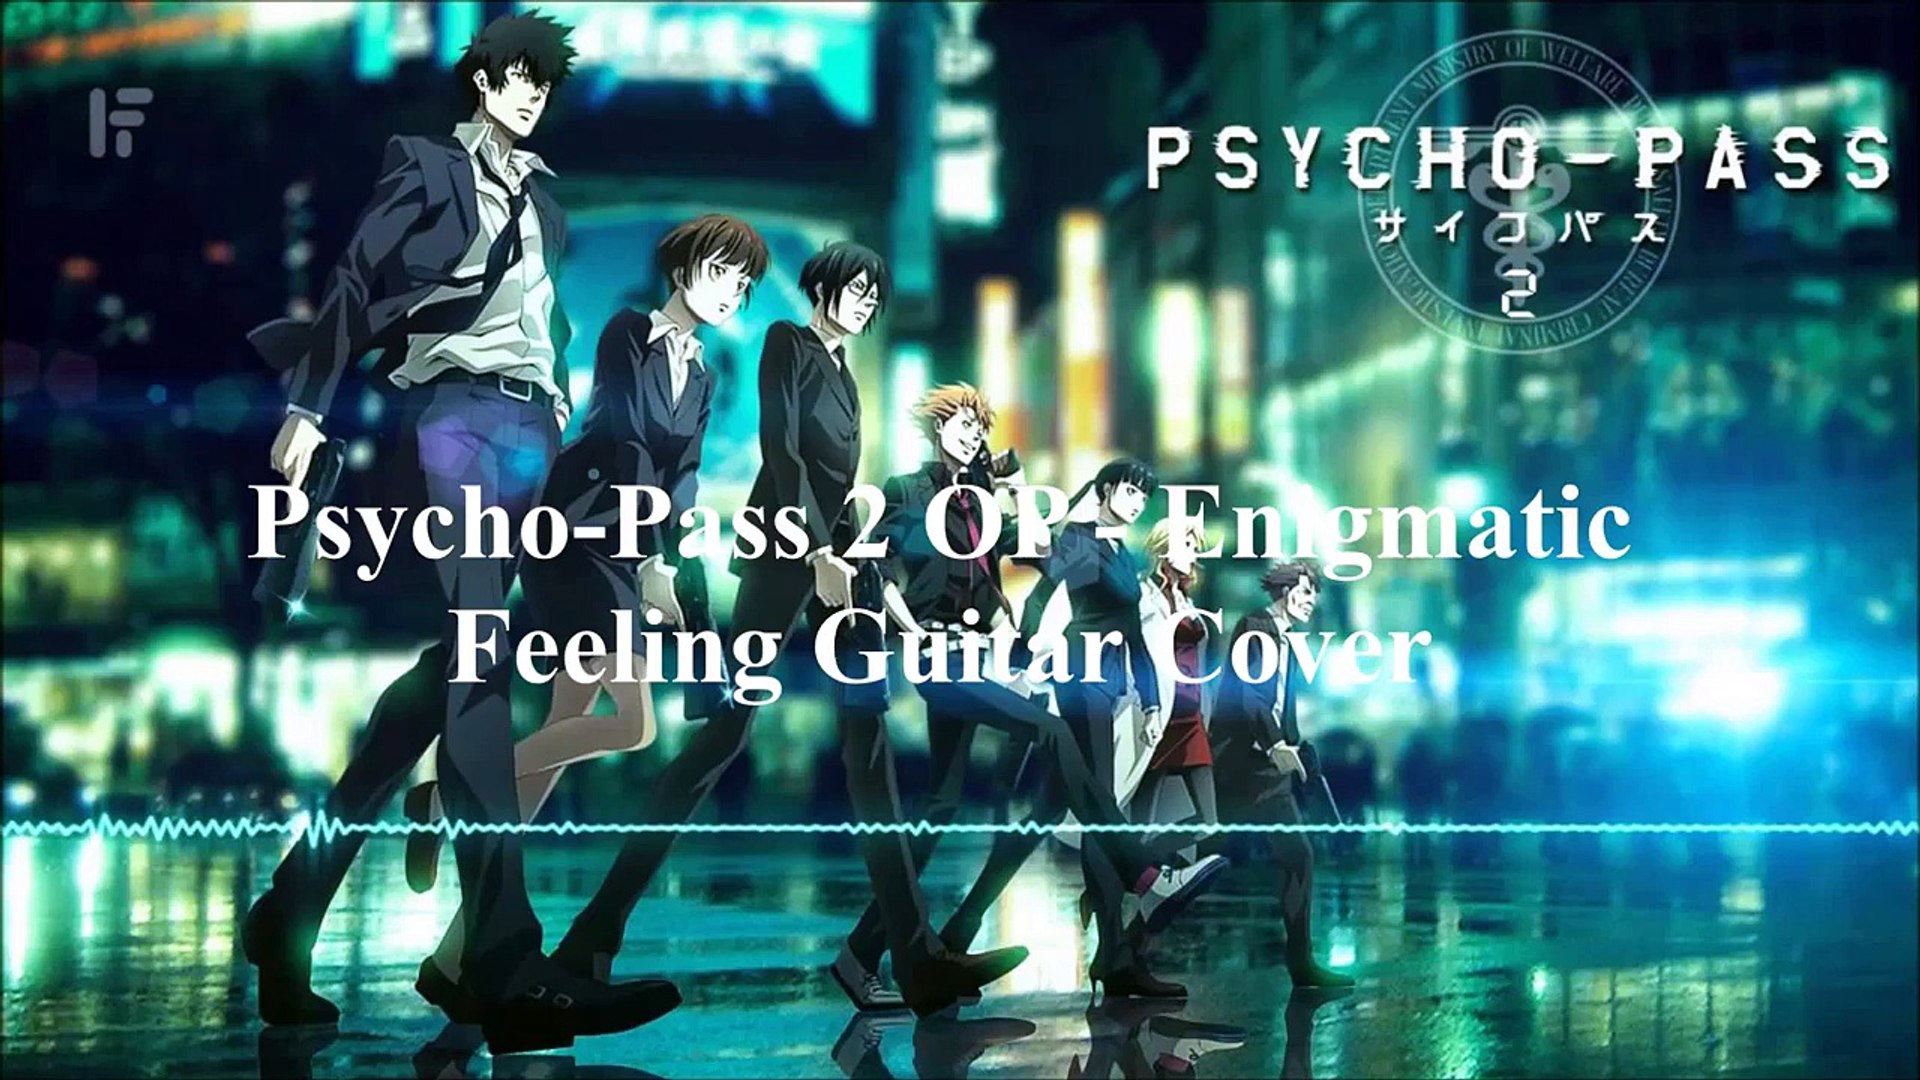 Psycho Pass 2 Op Enigmatic Feeling サイコパス 2 Guitar Cover Video Dailymotion